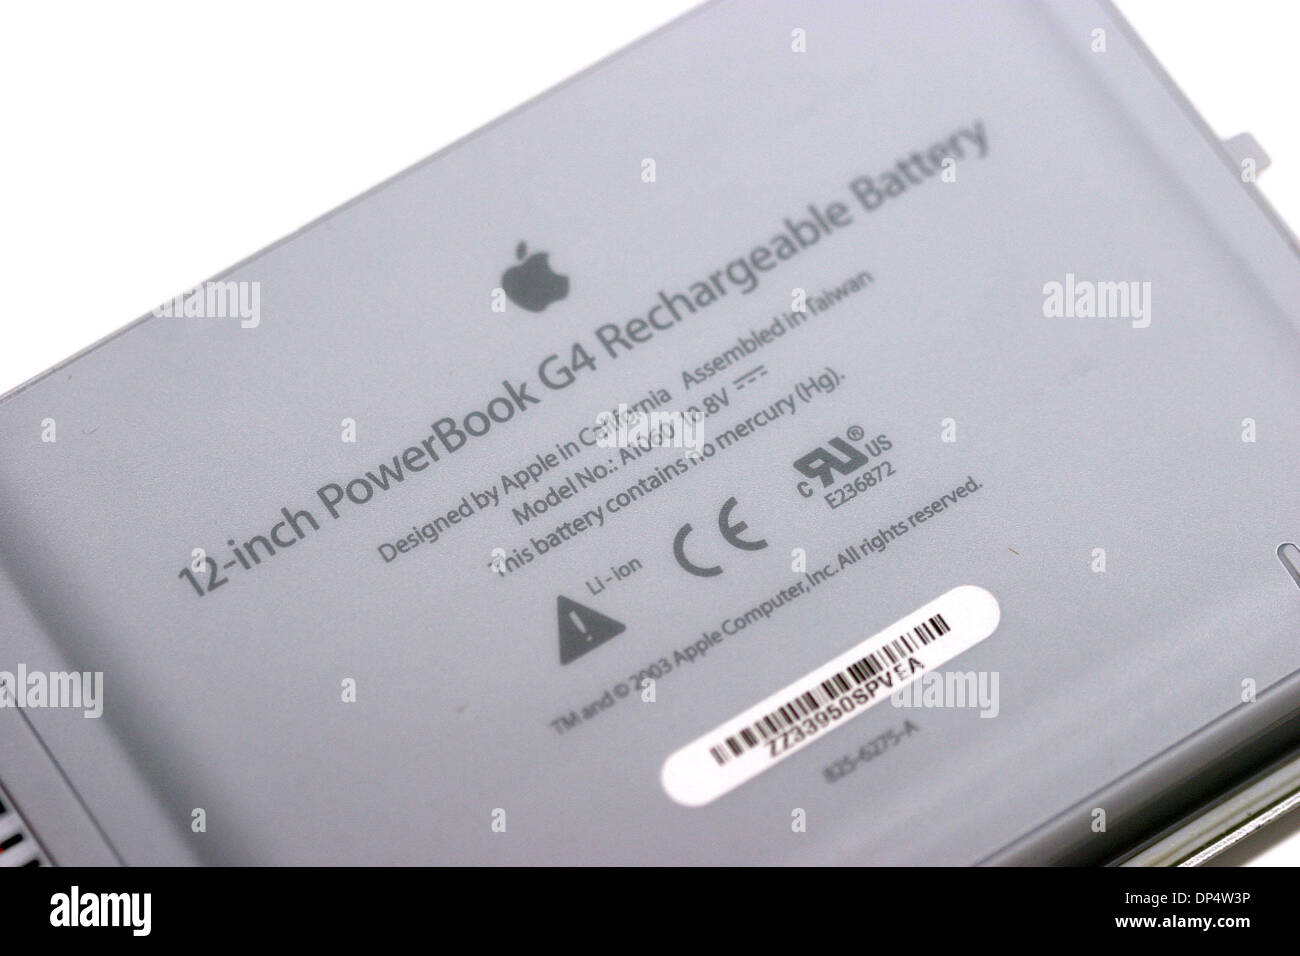 Aug 24, 2006; London, UK; Computer giant Apple is recalling 1.8m batteries used in its laptop computers worldwide after overheating complaints. The announcement affects laptop computers - the iBook G4 and Powerbook G4 - sold between October 2003 and August 2006. It follows Dell's decision to recall more than 4m batteries from its laptops last week. The recall does not impact on the Stock Photo